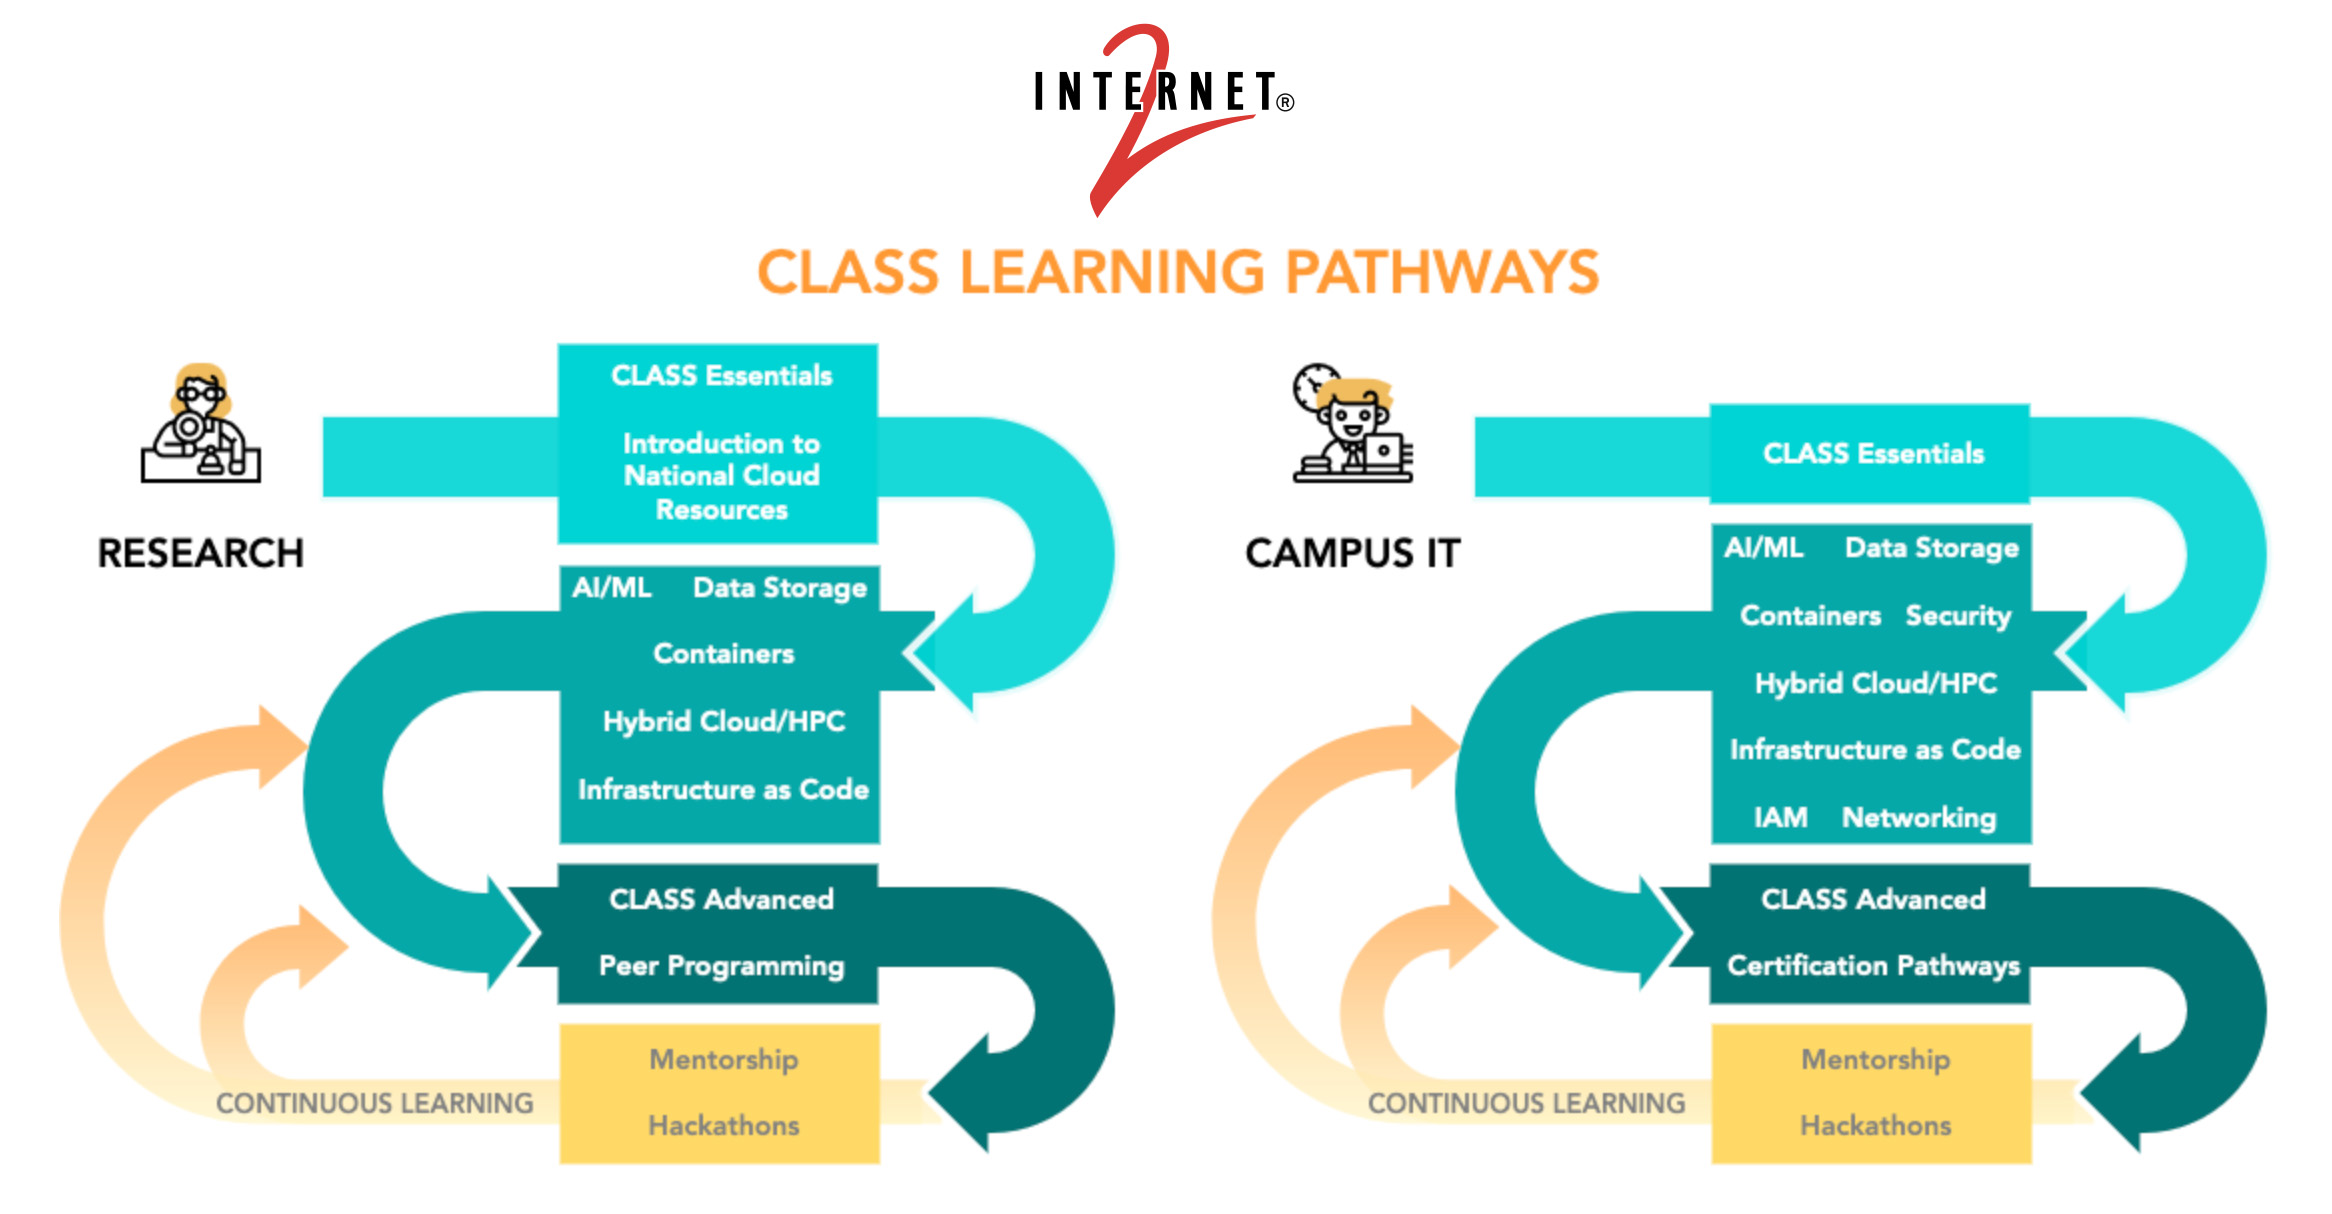 Internet2 CLASS learning pathways